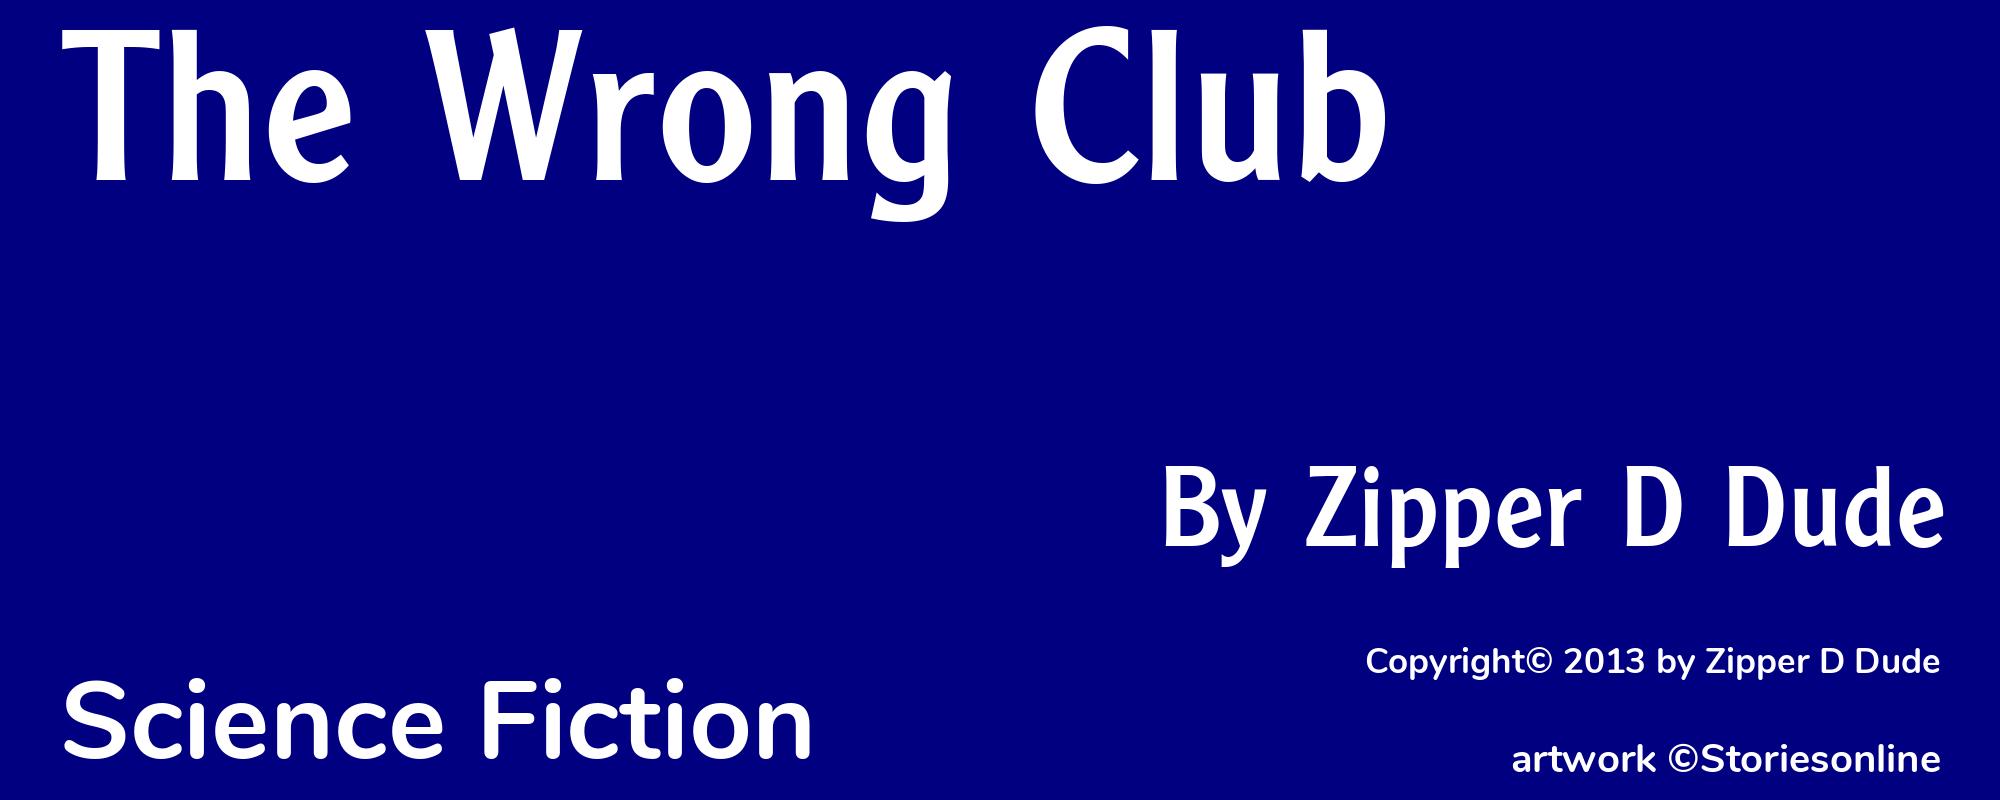 The Wrong Club - Cover